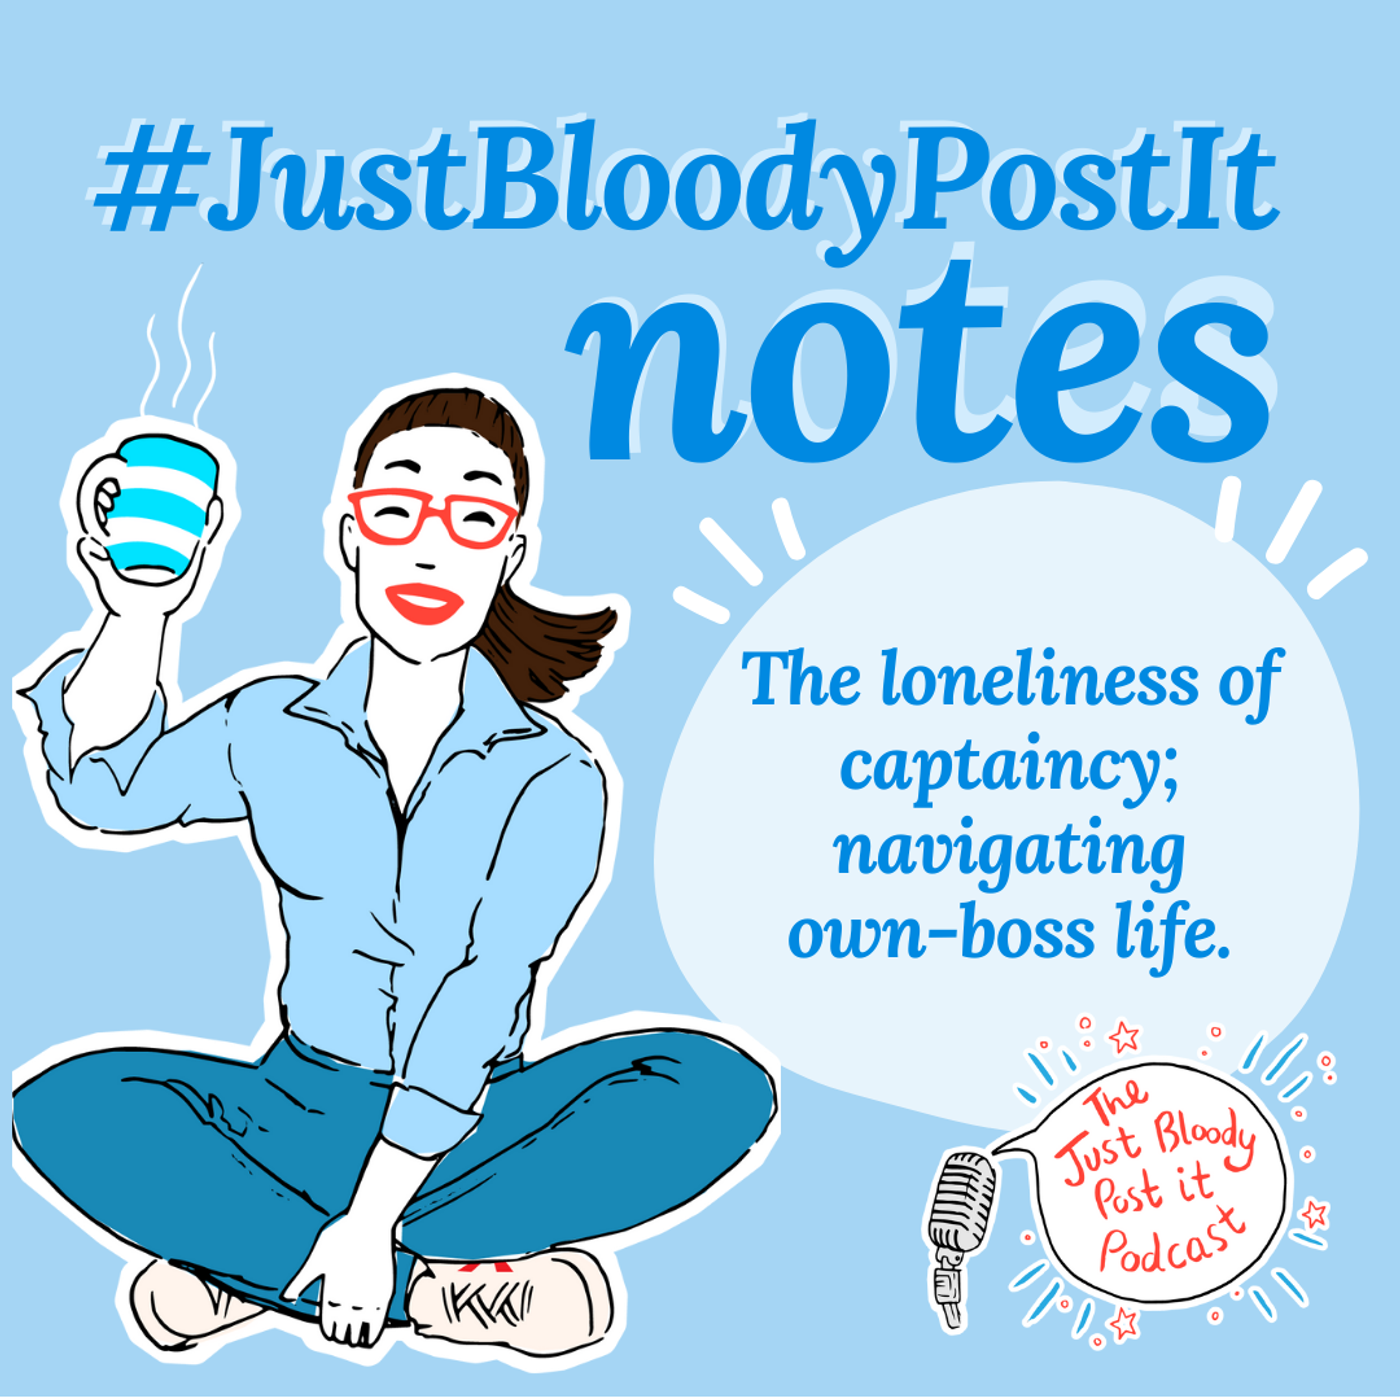 S2 Ep17: #JustBloodyPostIt note; the loneliness of captaincy and navigating own-boss life.